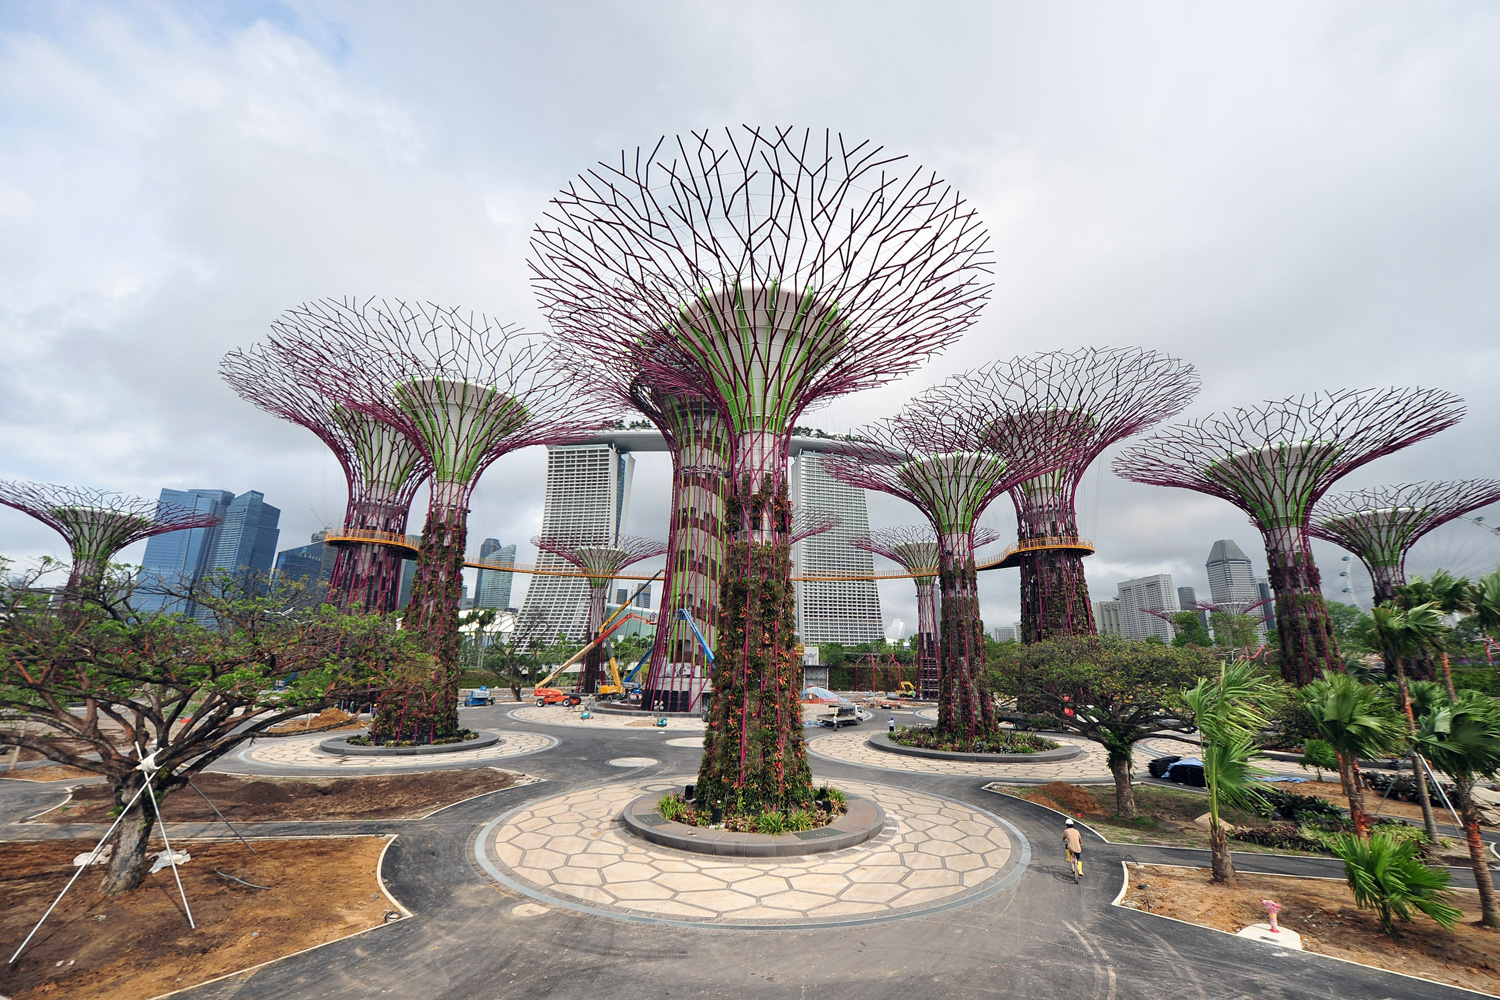 April 3, 2012. Workers are seen busy with the construction work of the Supertrees in the Supertree Grove at the Gardens by the Bay in Singapore.